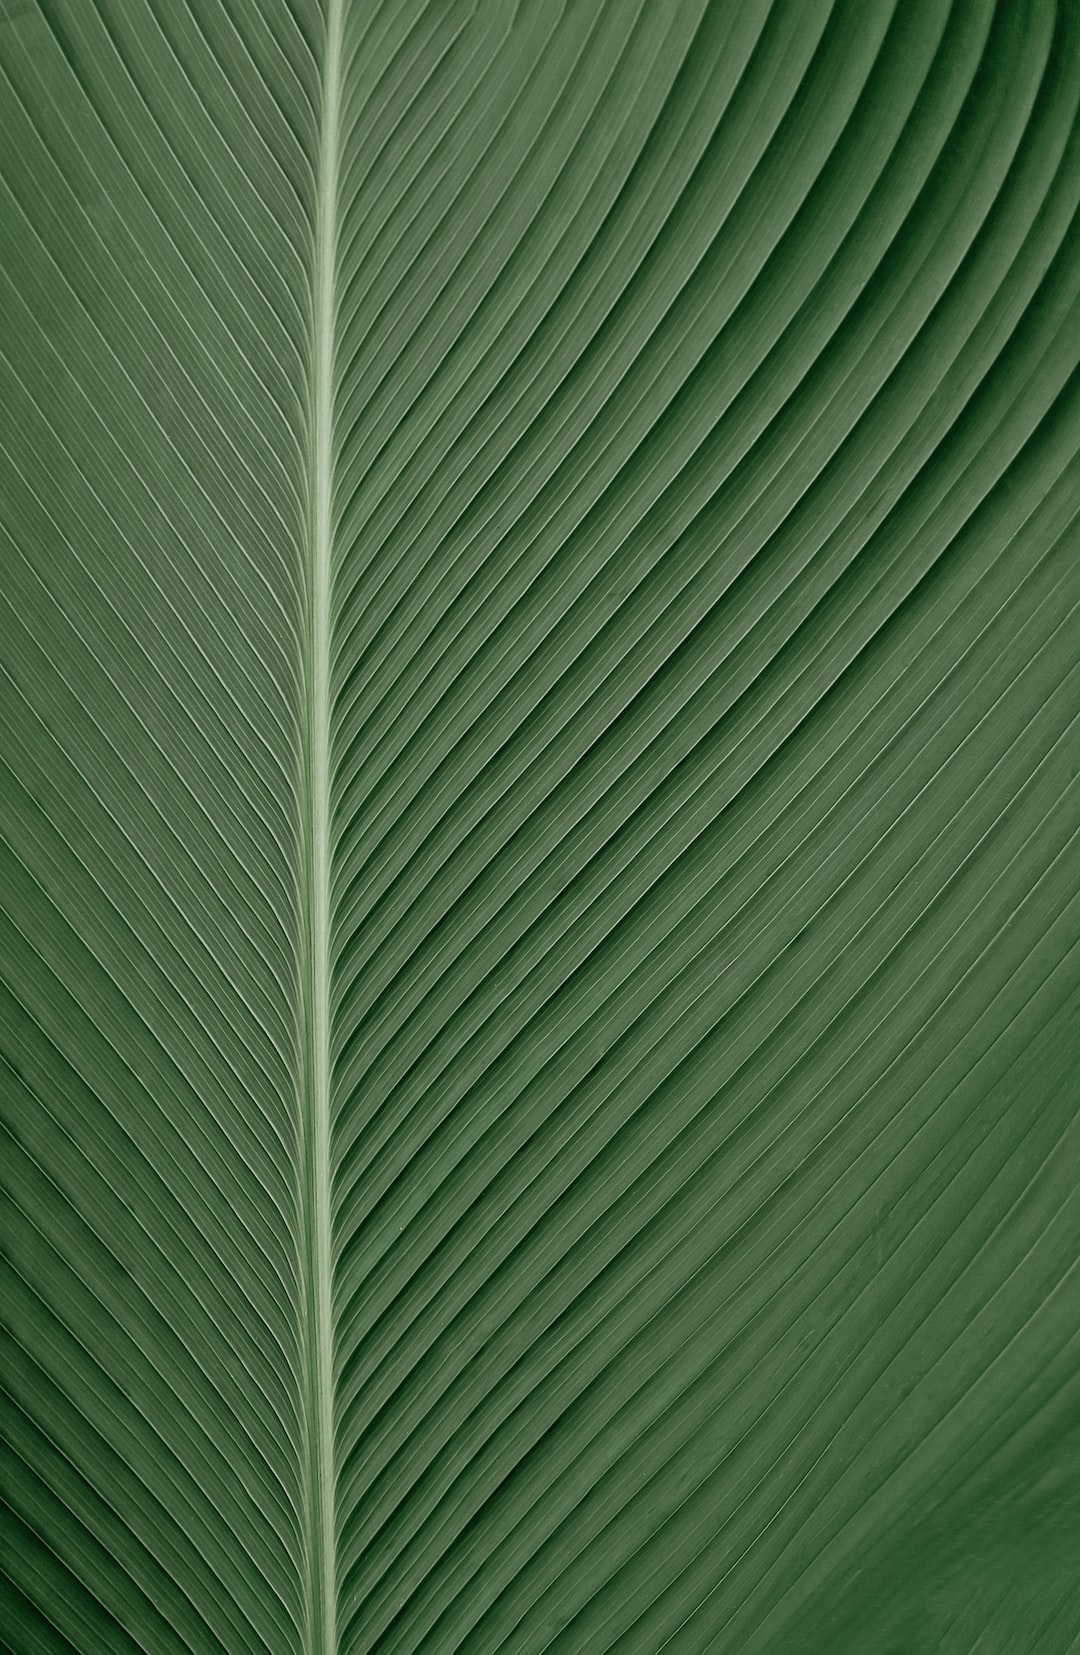 the texture of green leaf